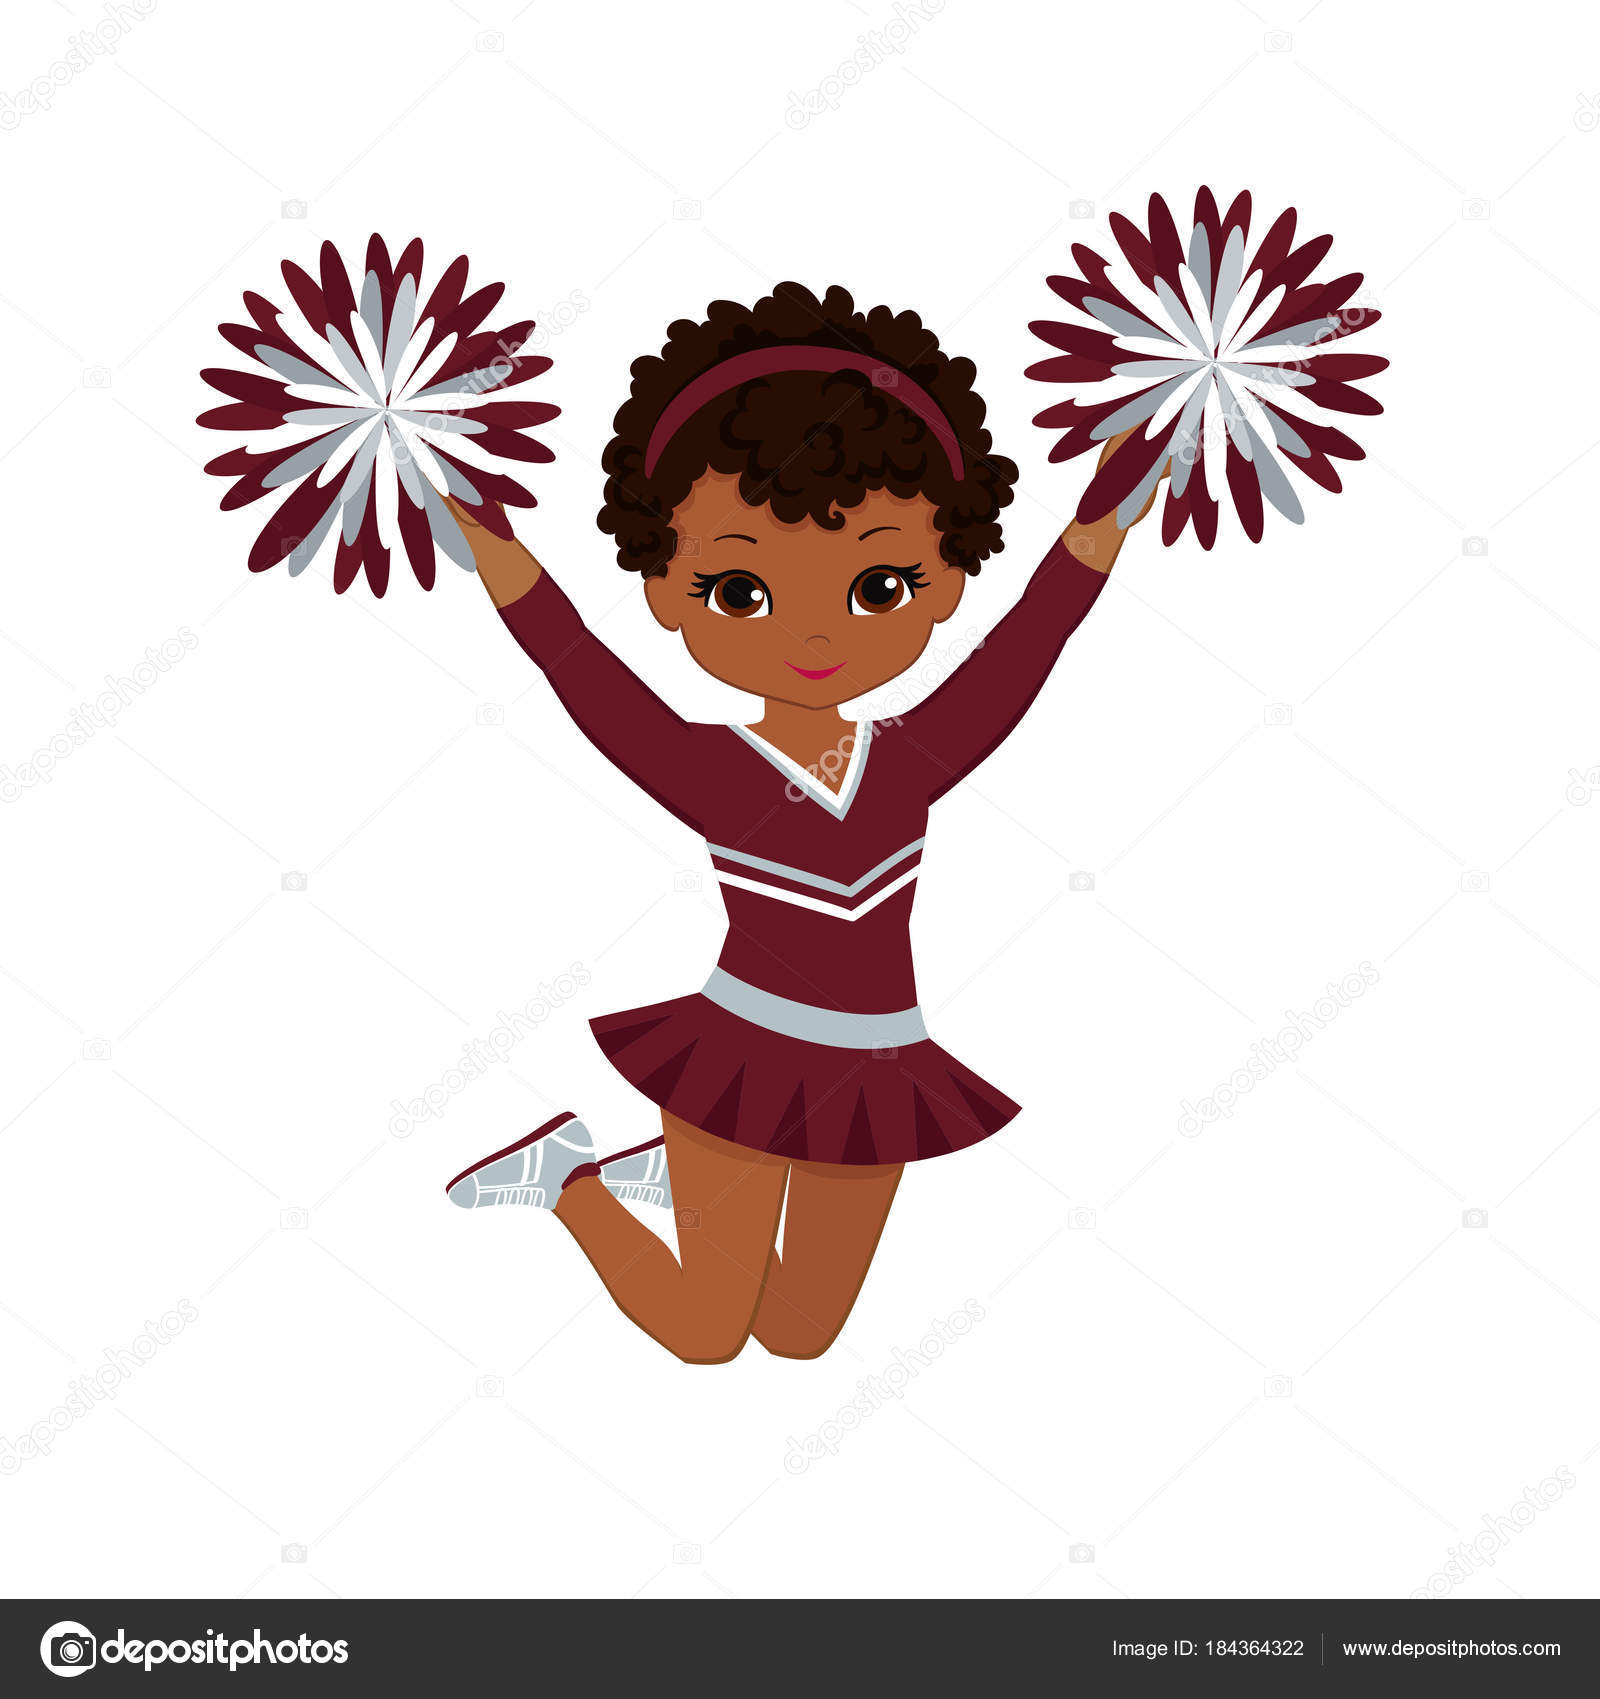 ᐈ Pom Poms Clip Art Stock Drawings Royalty Free Pom Icon Download On Depositphotos